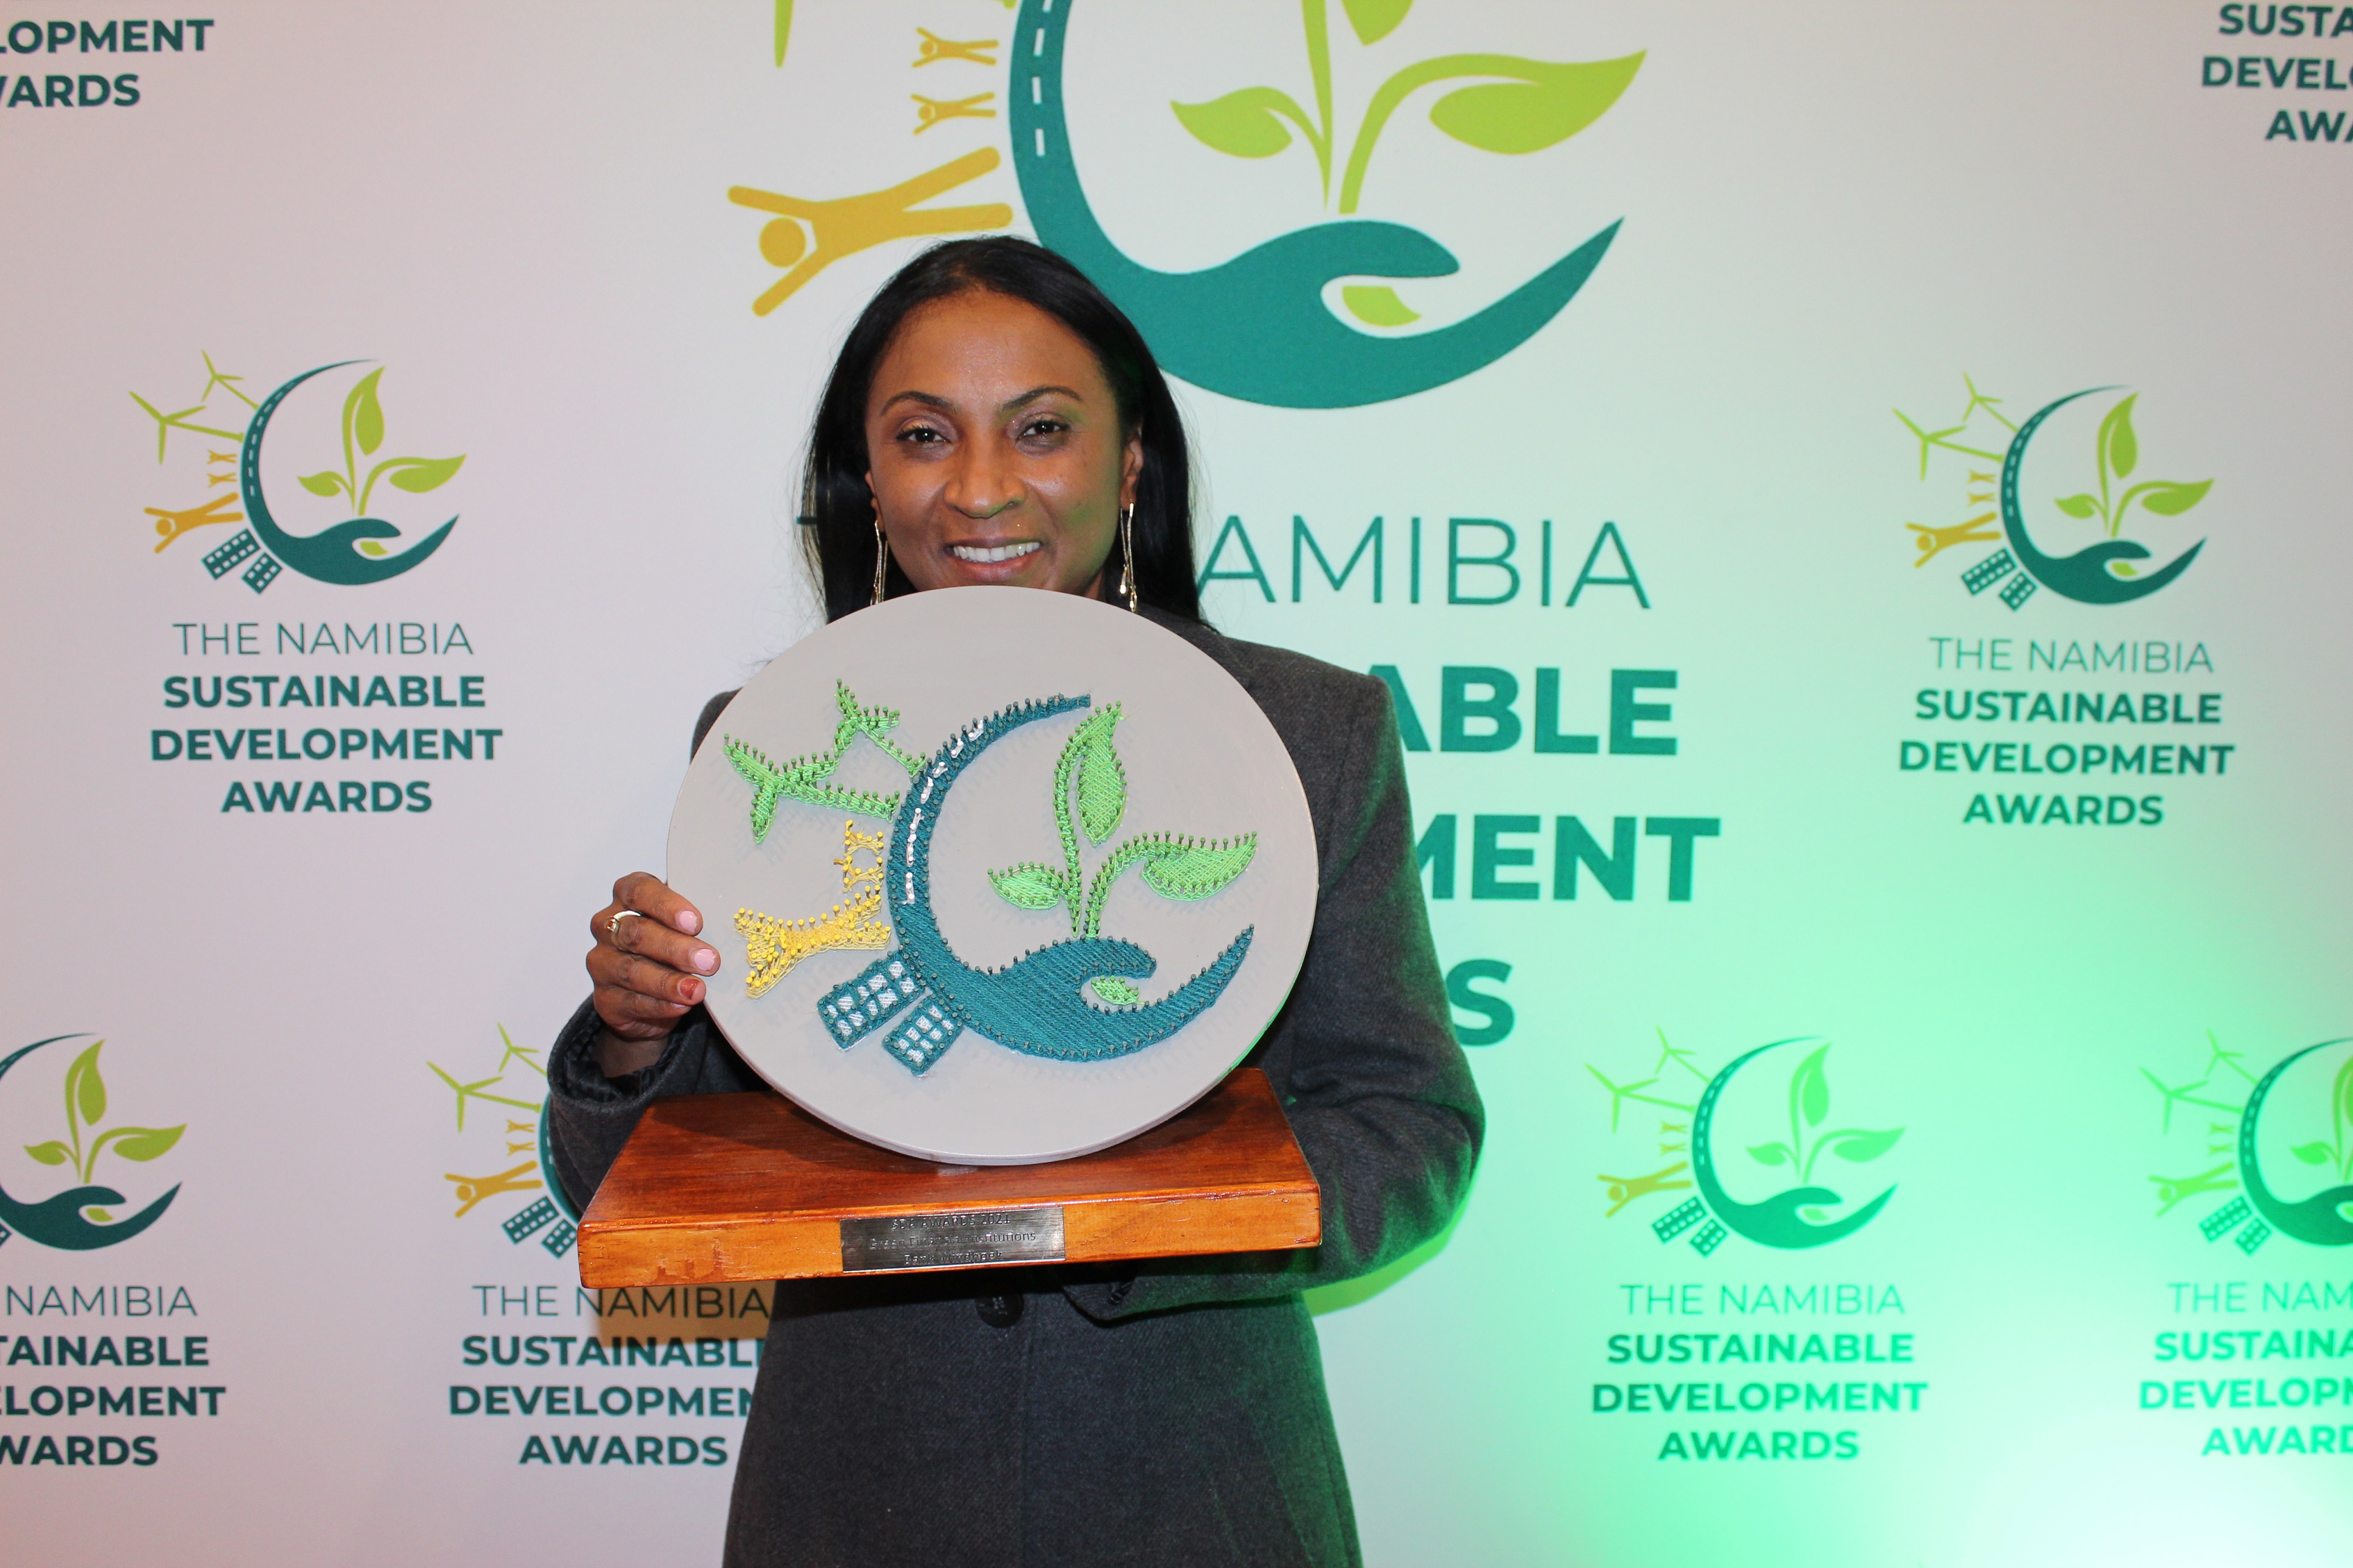 Bank Windhoek’s Managing Director, Baronice Hans, pictured with the Sustainable Development Award.